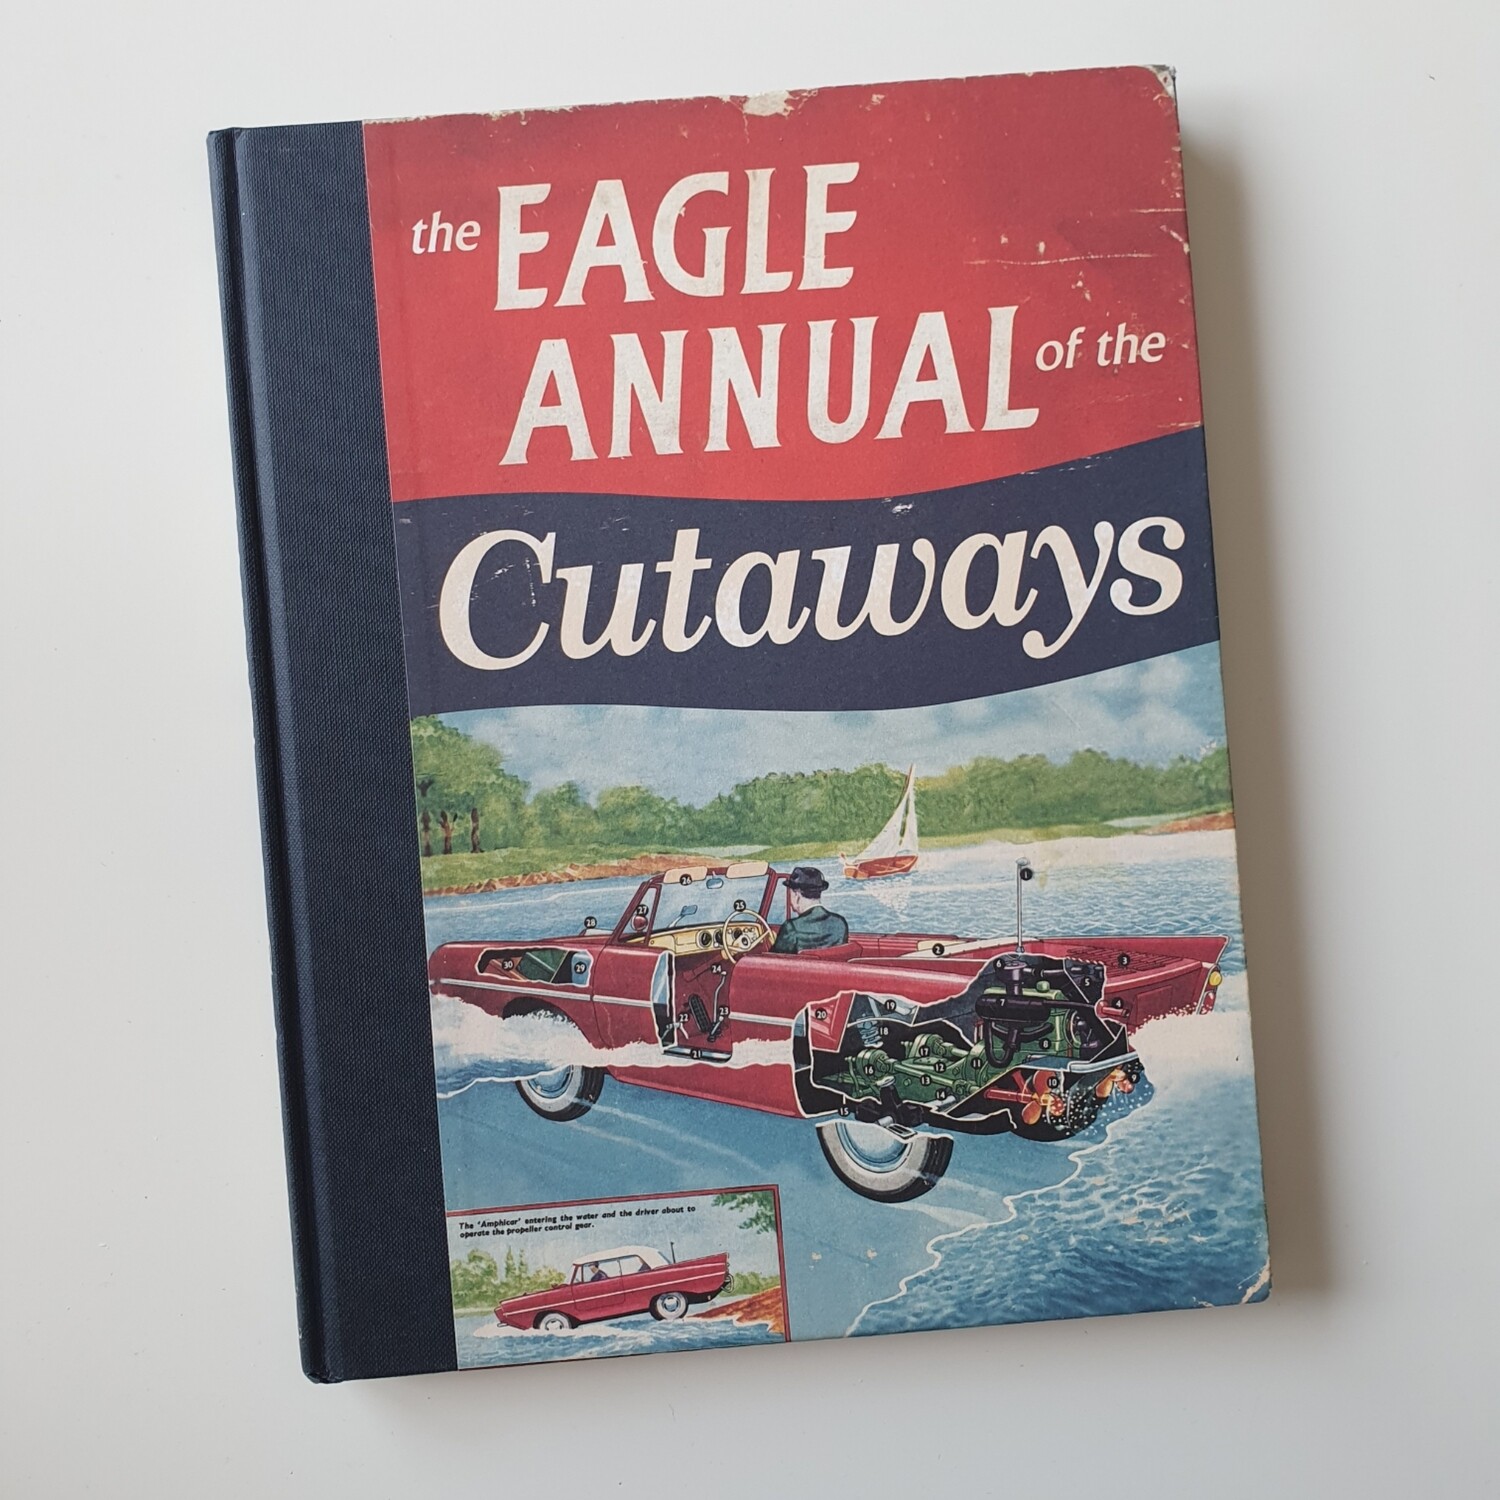 The Eagle Annual Cutaways - inside cars and machines